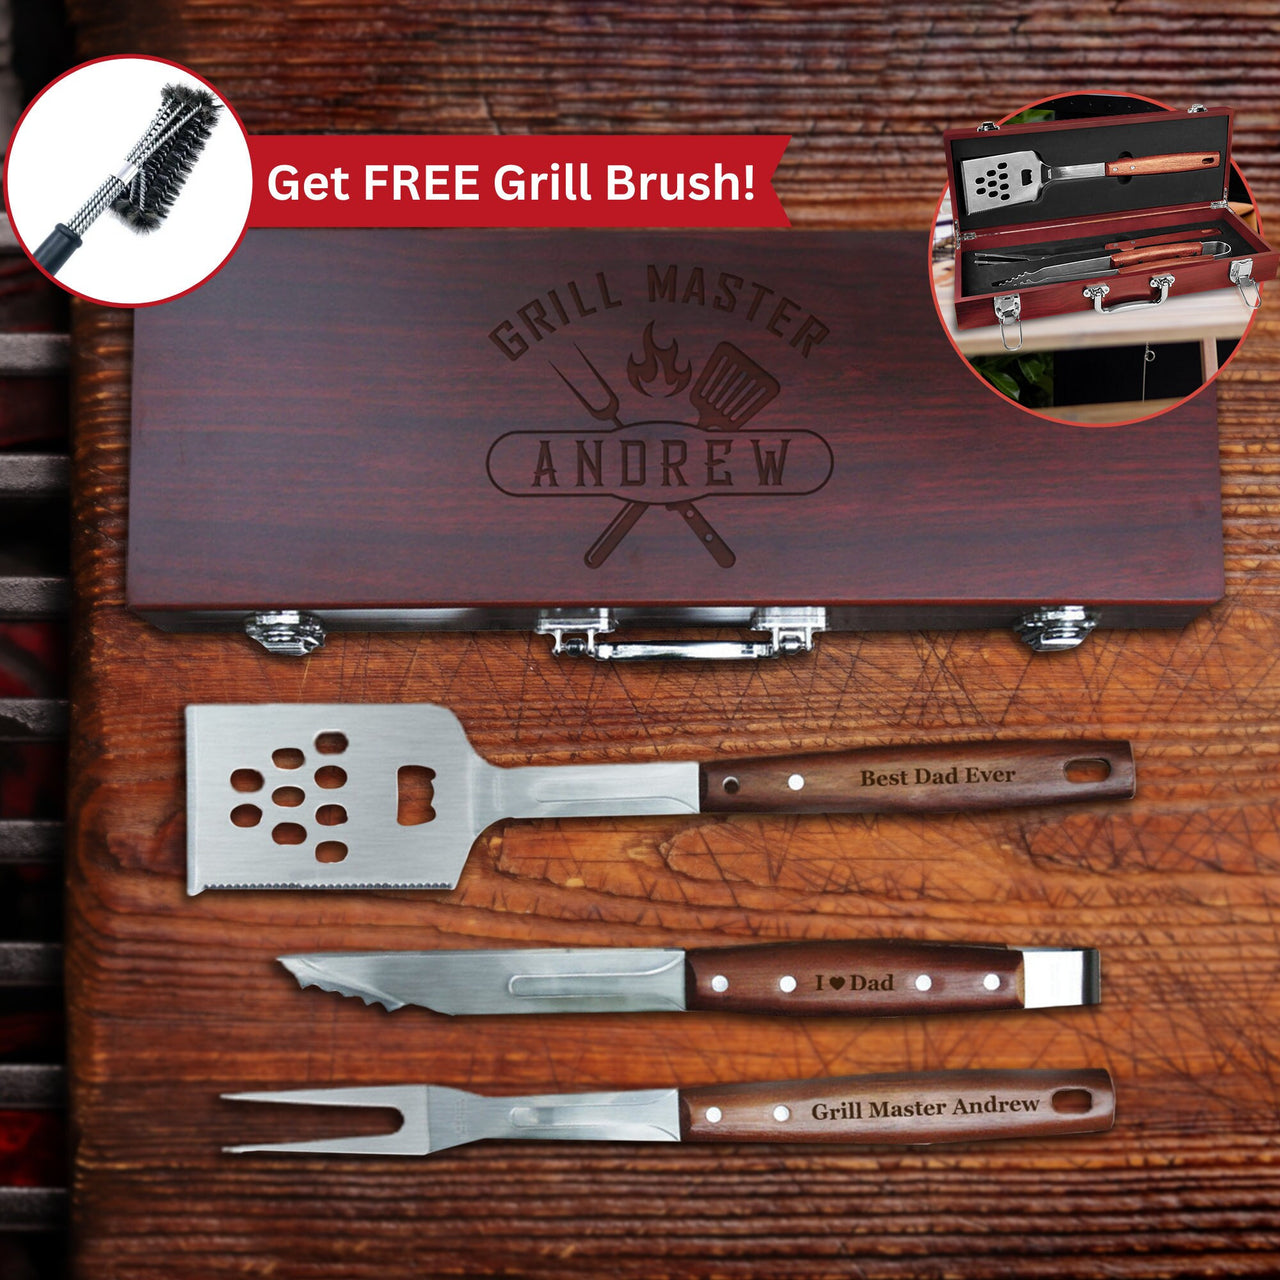 Custom BBQ Grill Gift Set: Rosewood Box with 3-Piece Grill Accessories